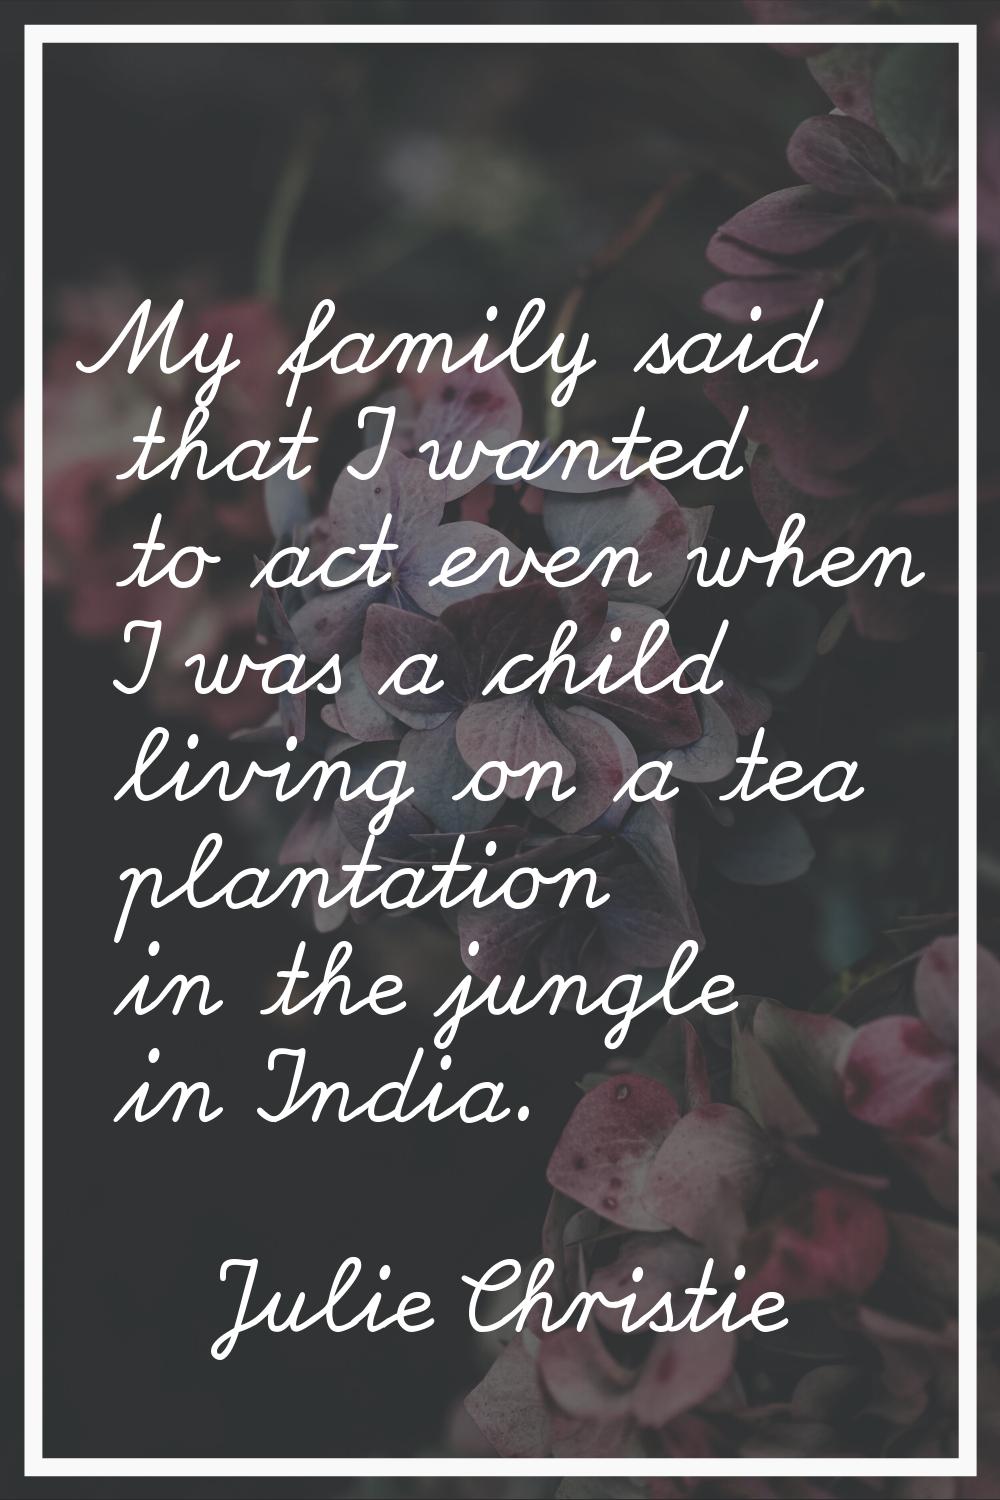 My family said that I wanted to act even when I was a child living on a tea plantation in the jungl